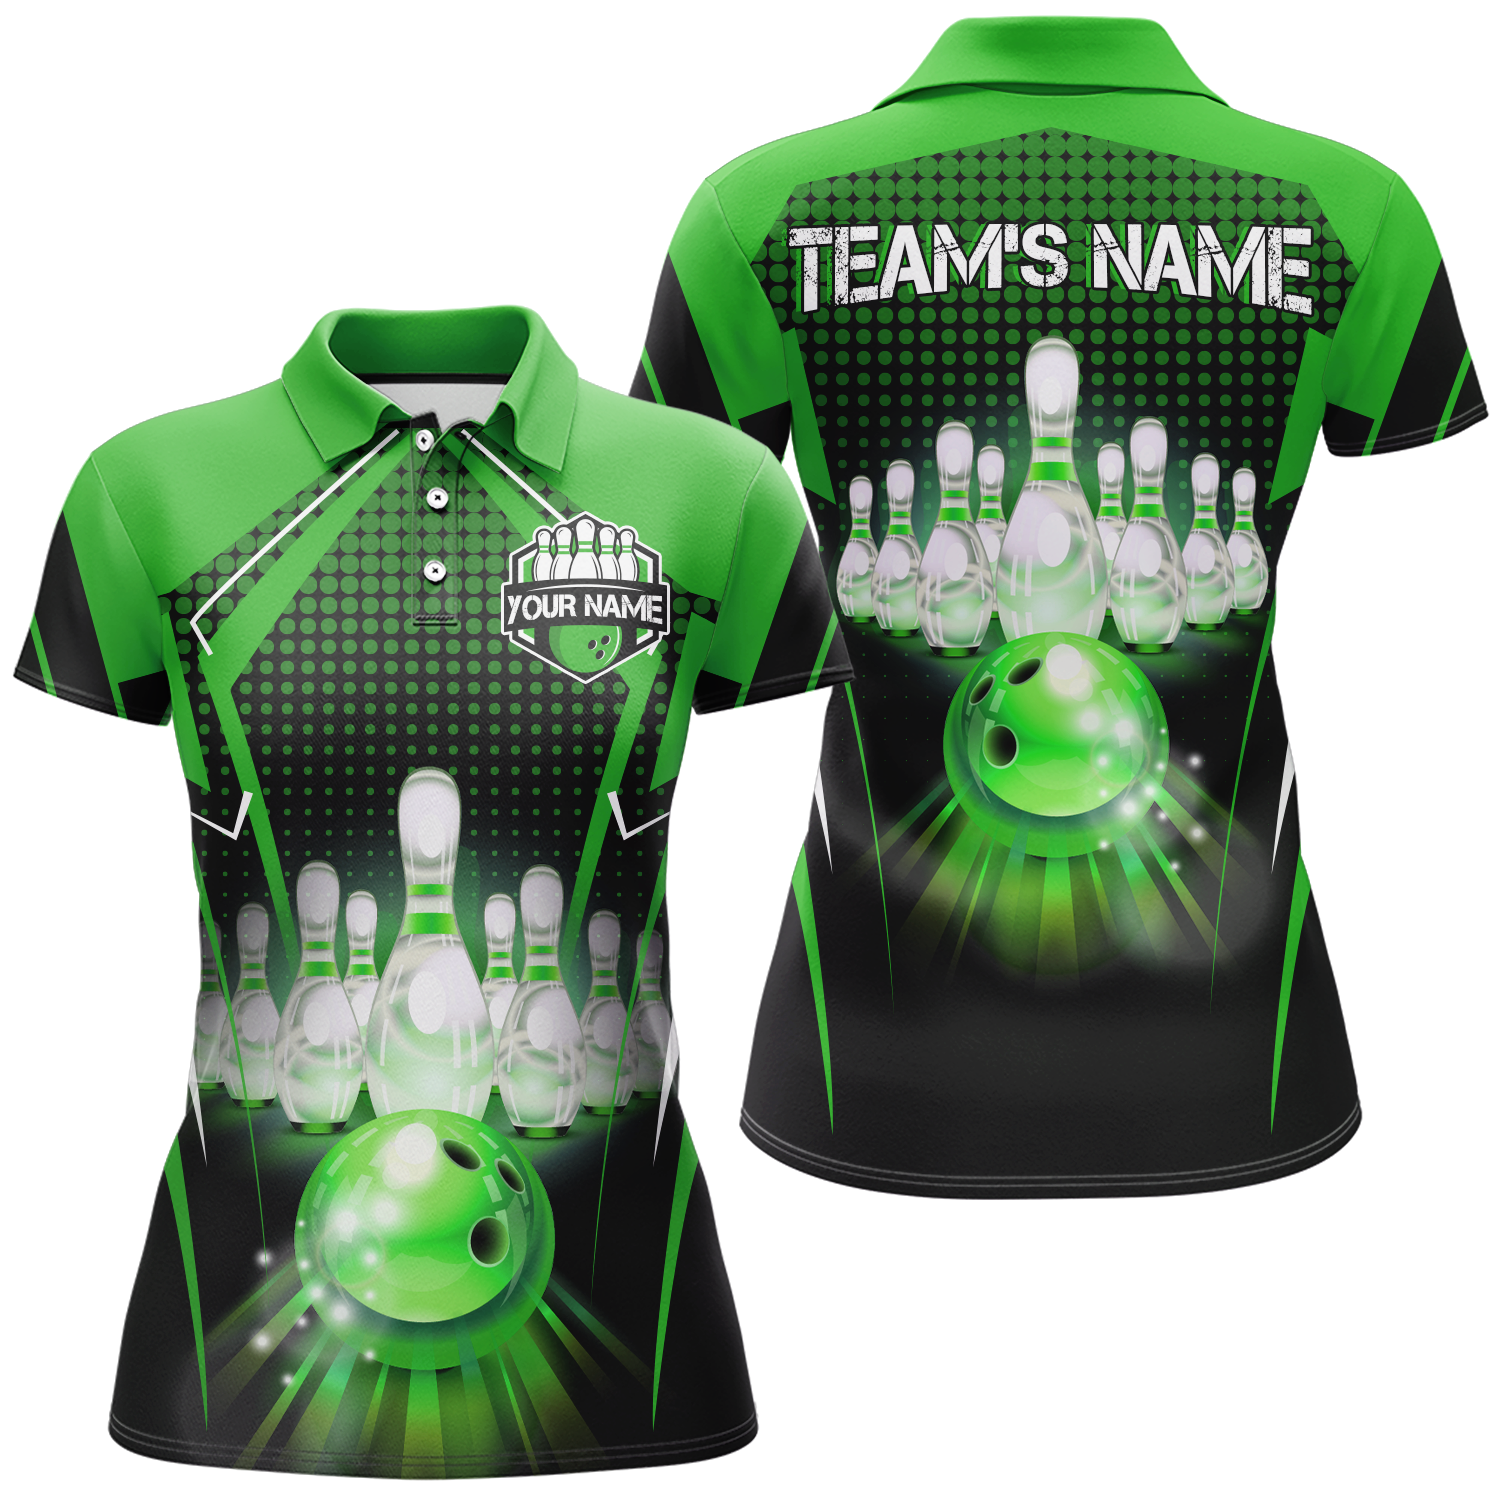  Personalized Your Team Name and Designs Custom